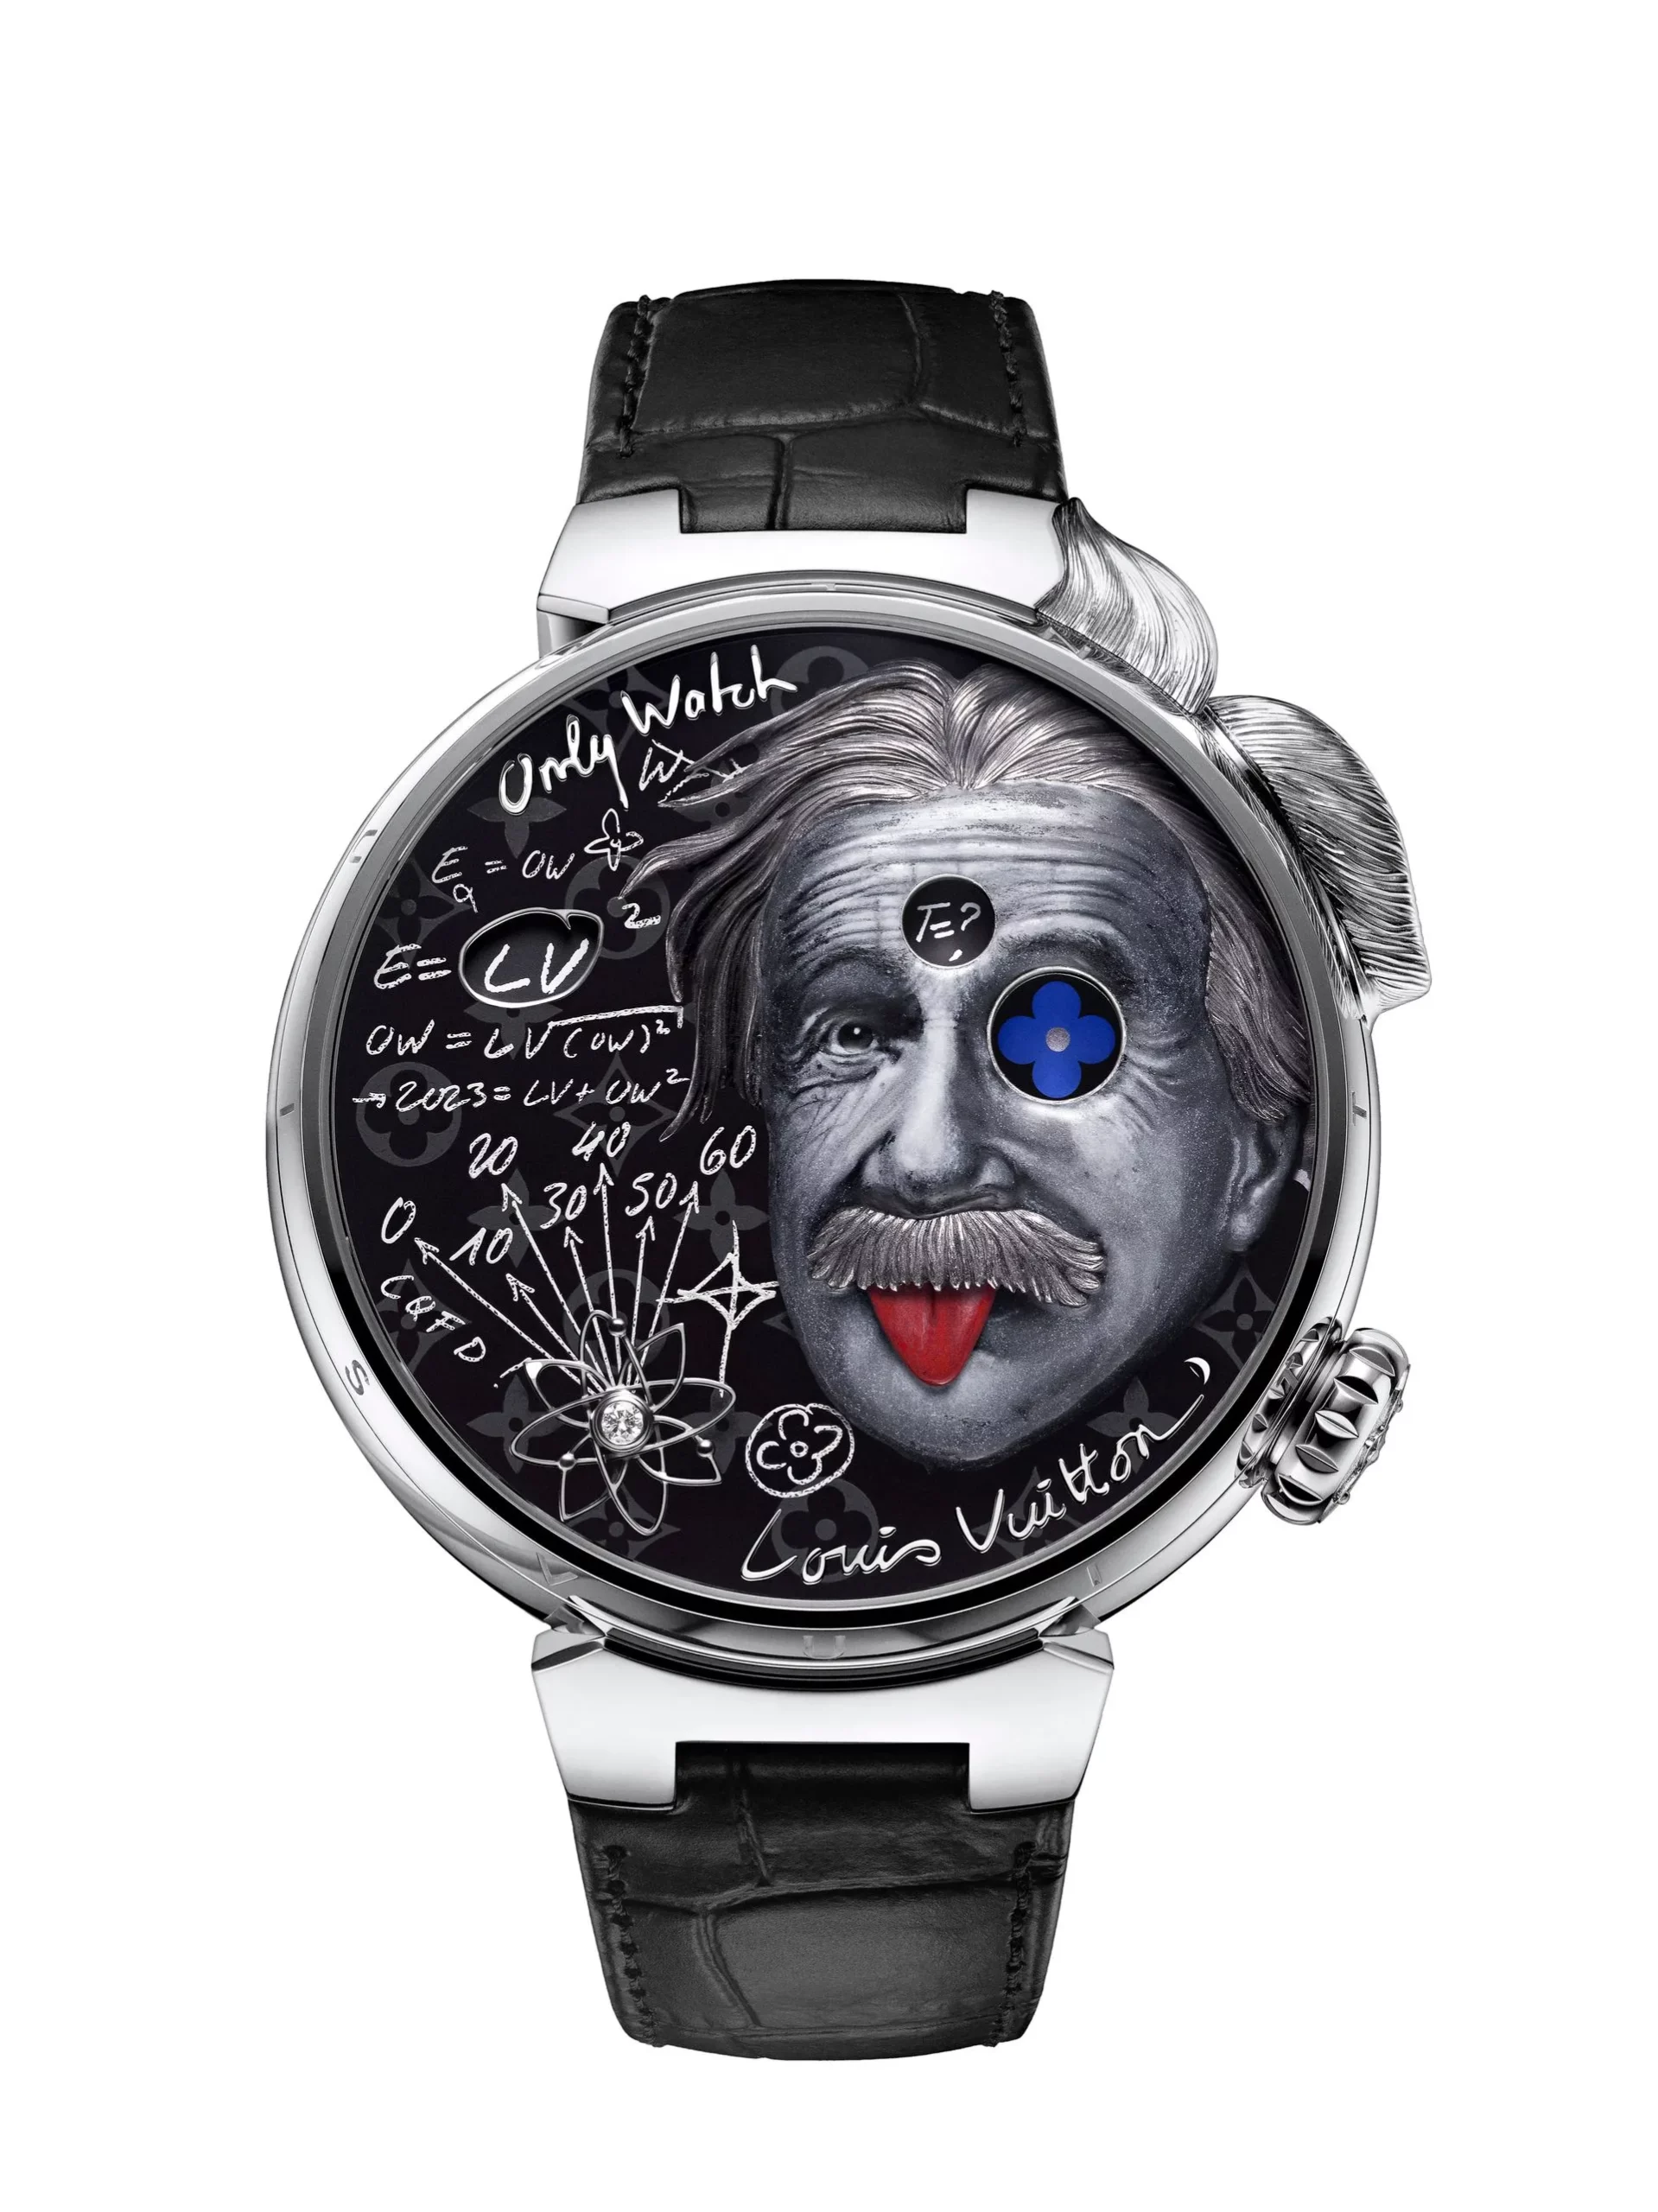 The Louis Vuitton Tambour Opera Automata is a stunning piece of